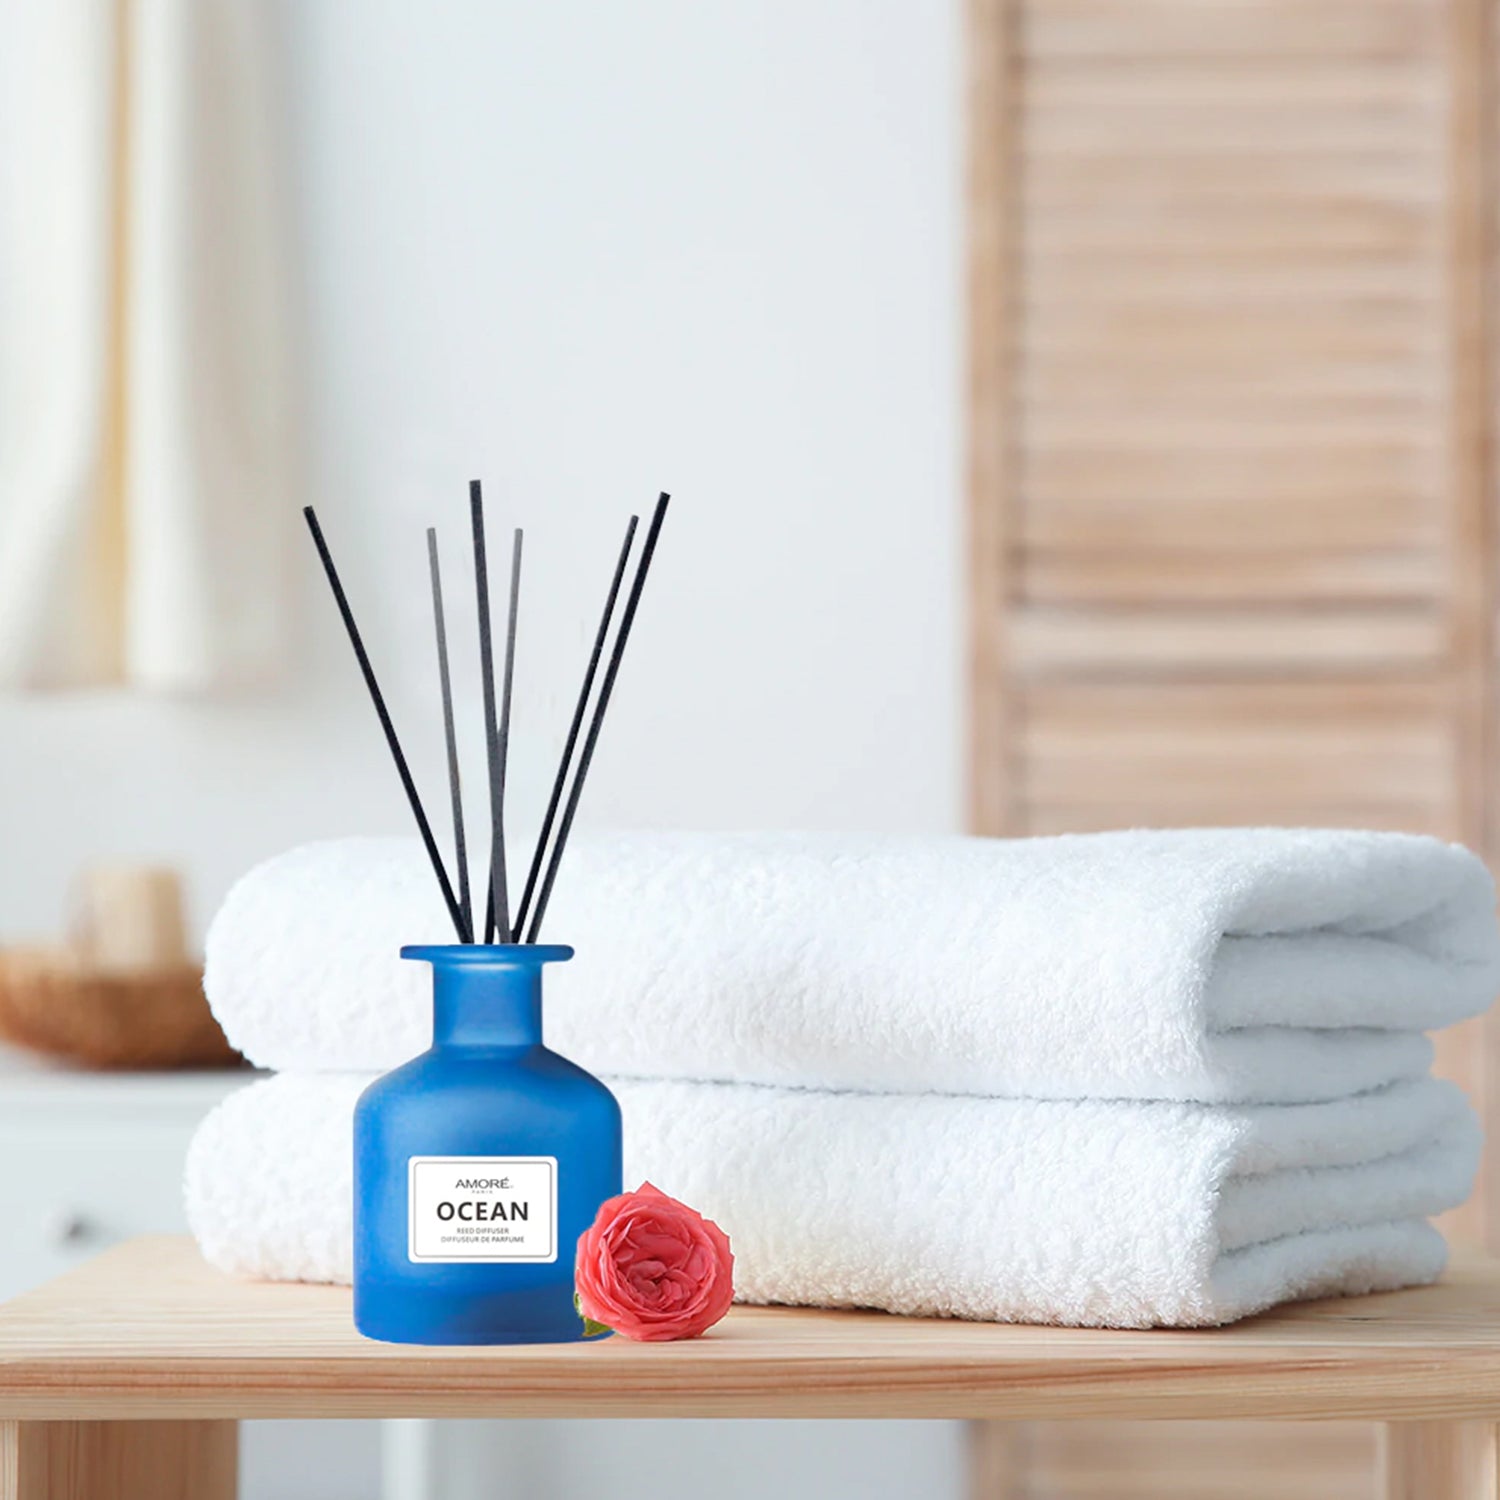 Premium Reed Diffusers And Air Freshener For Aesthetic Home Decor - 5. –  AMORÉ PARIS USA